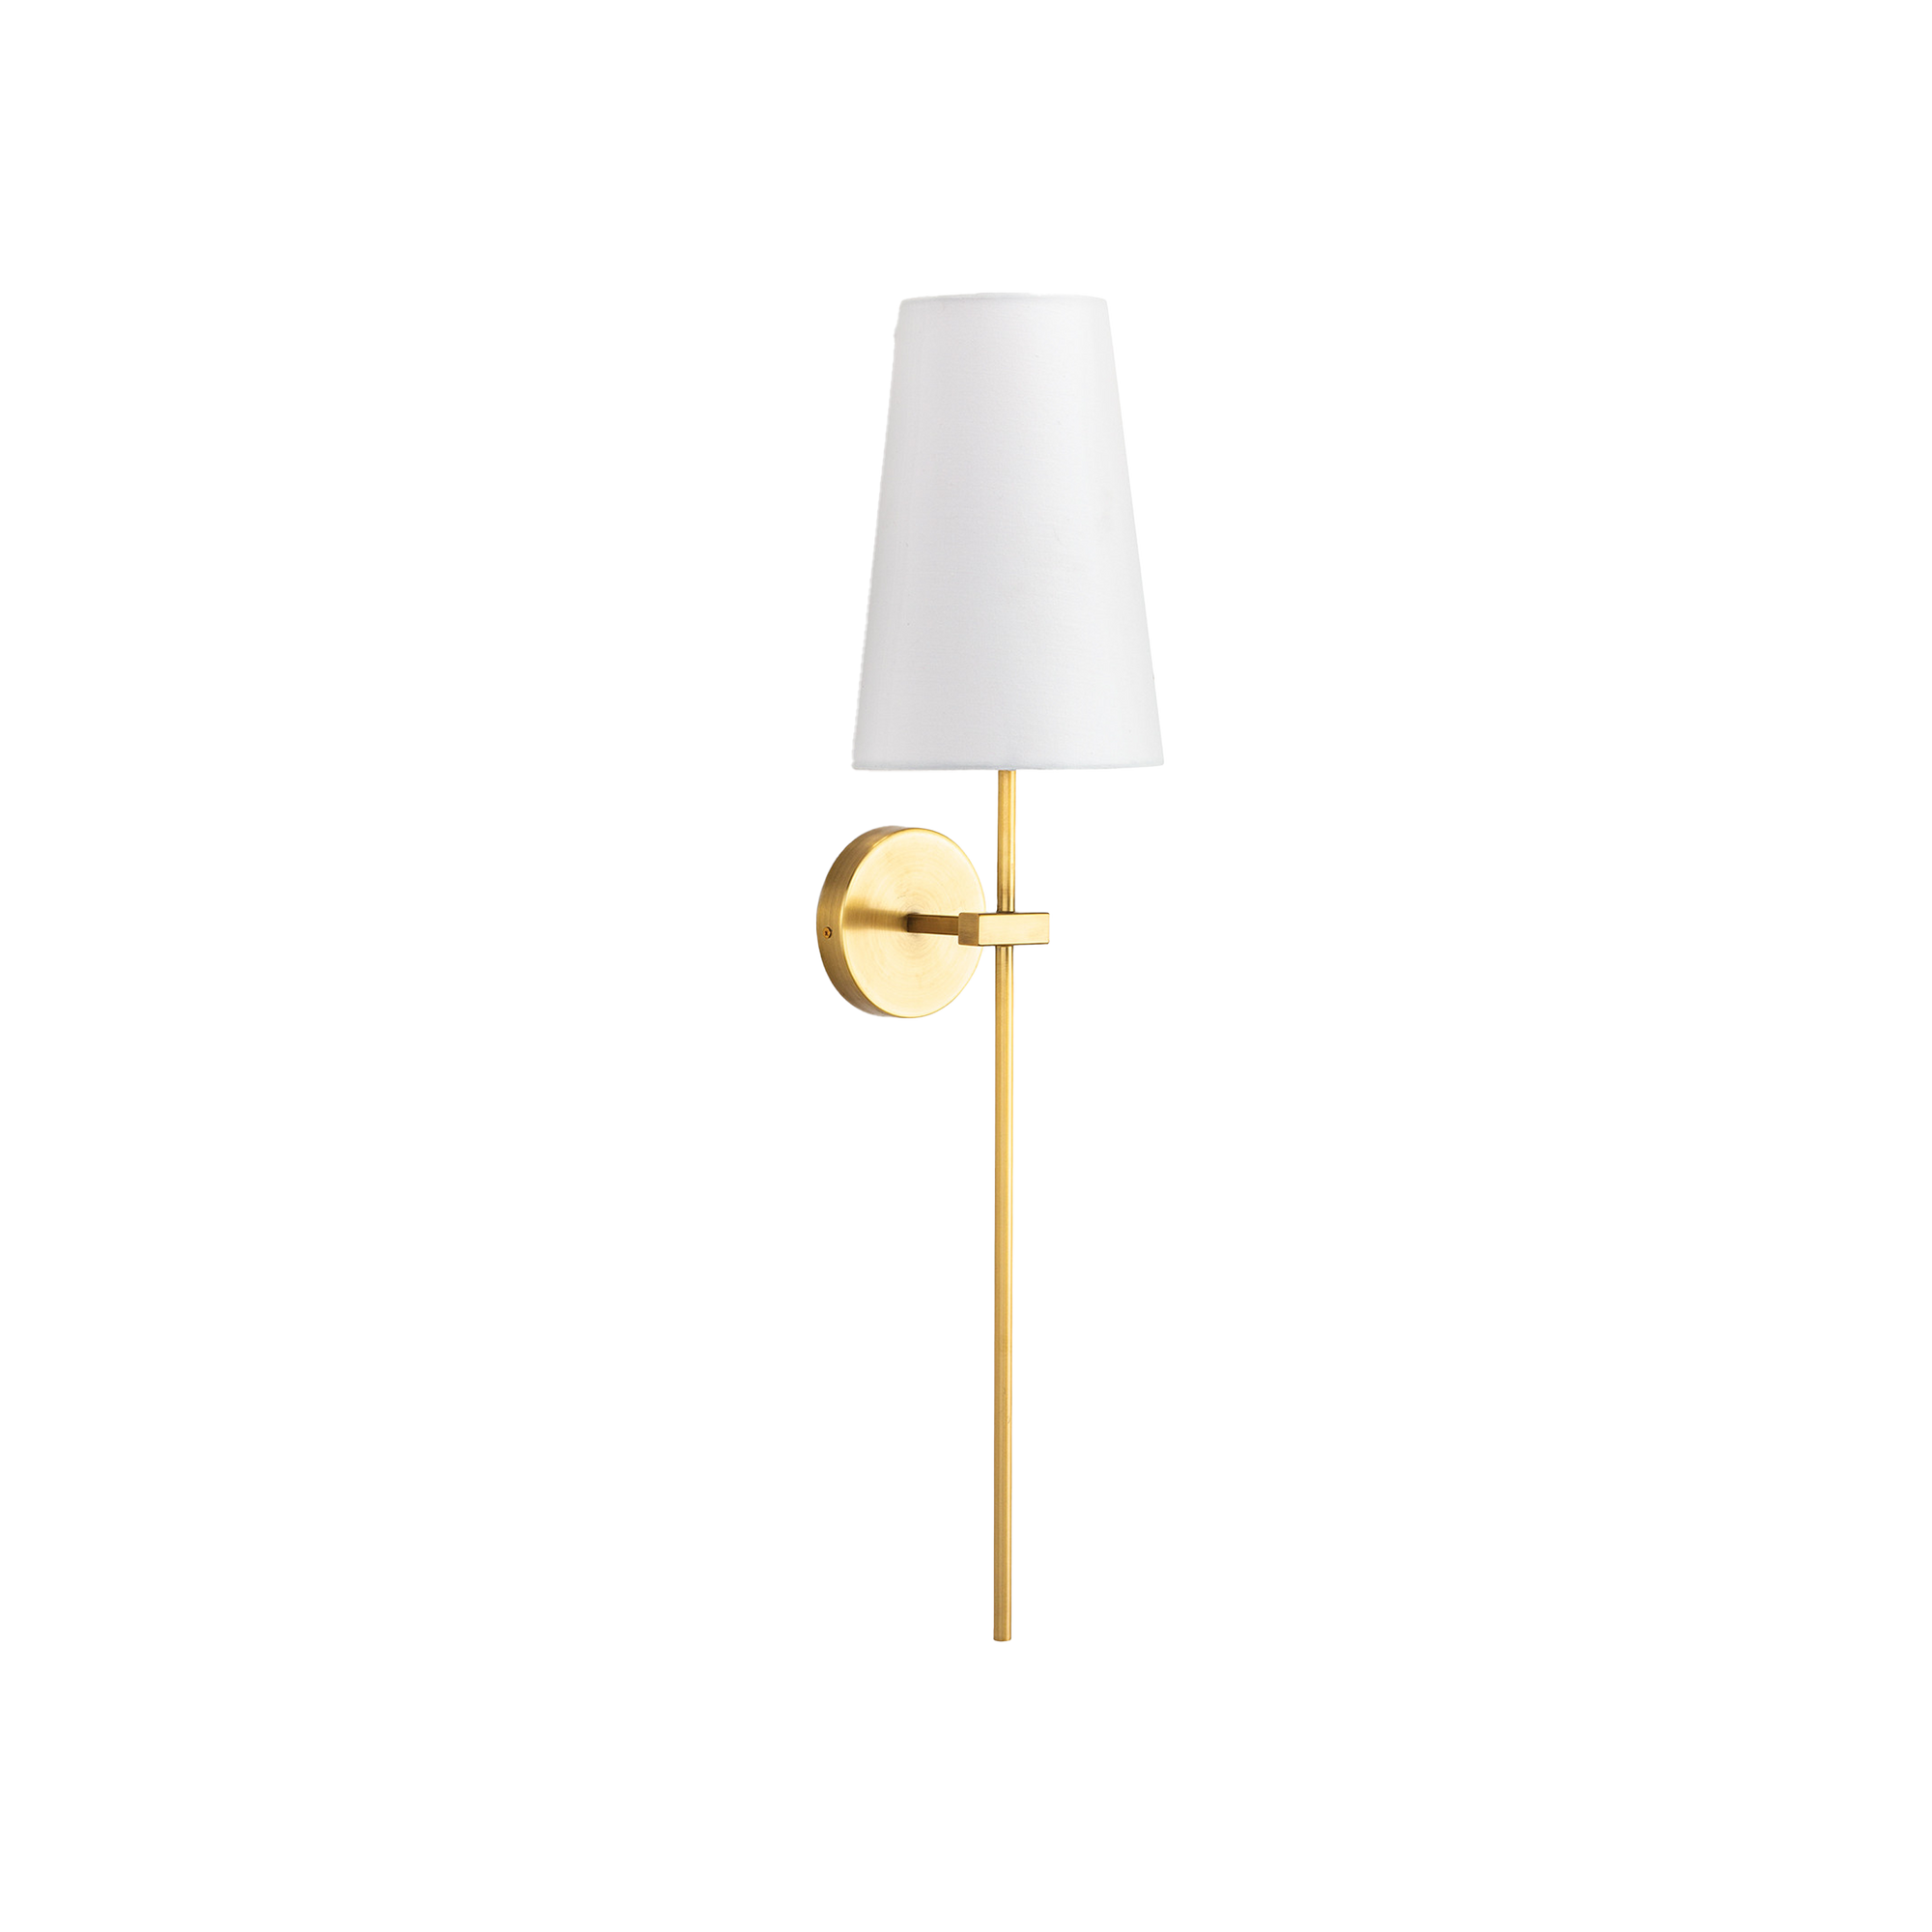 Sleek and simplistic, the Toni Sconce is a beautiful addition to a variety of different aesthetic spaces.